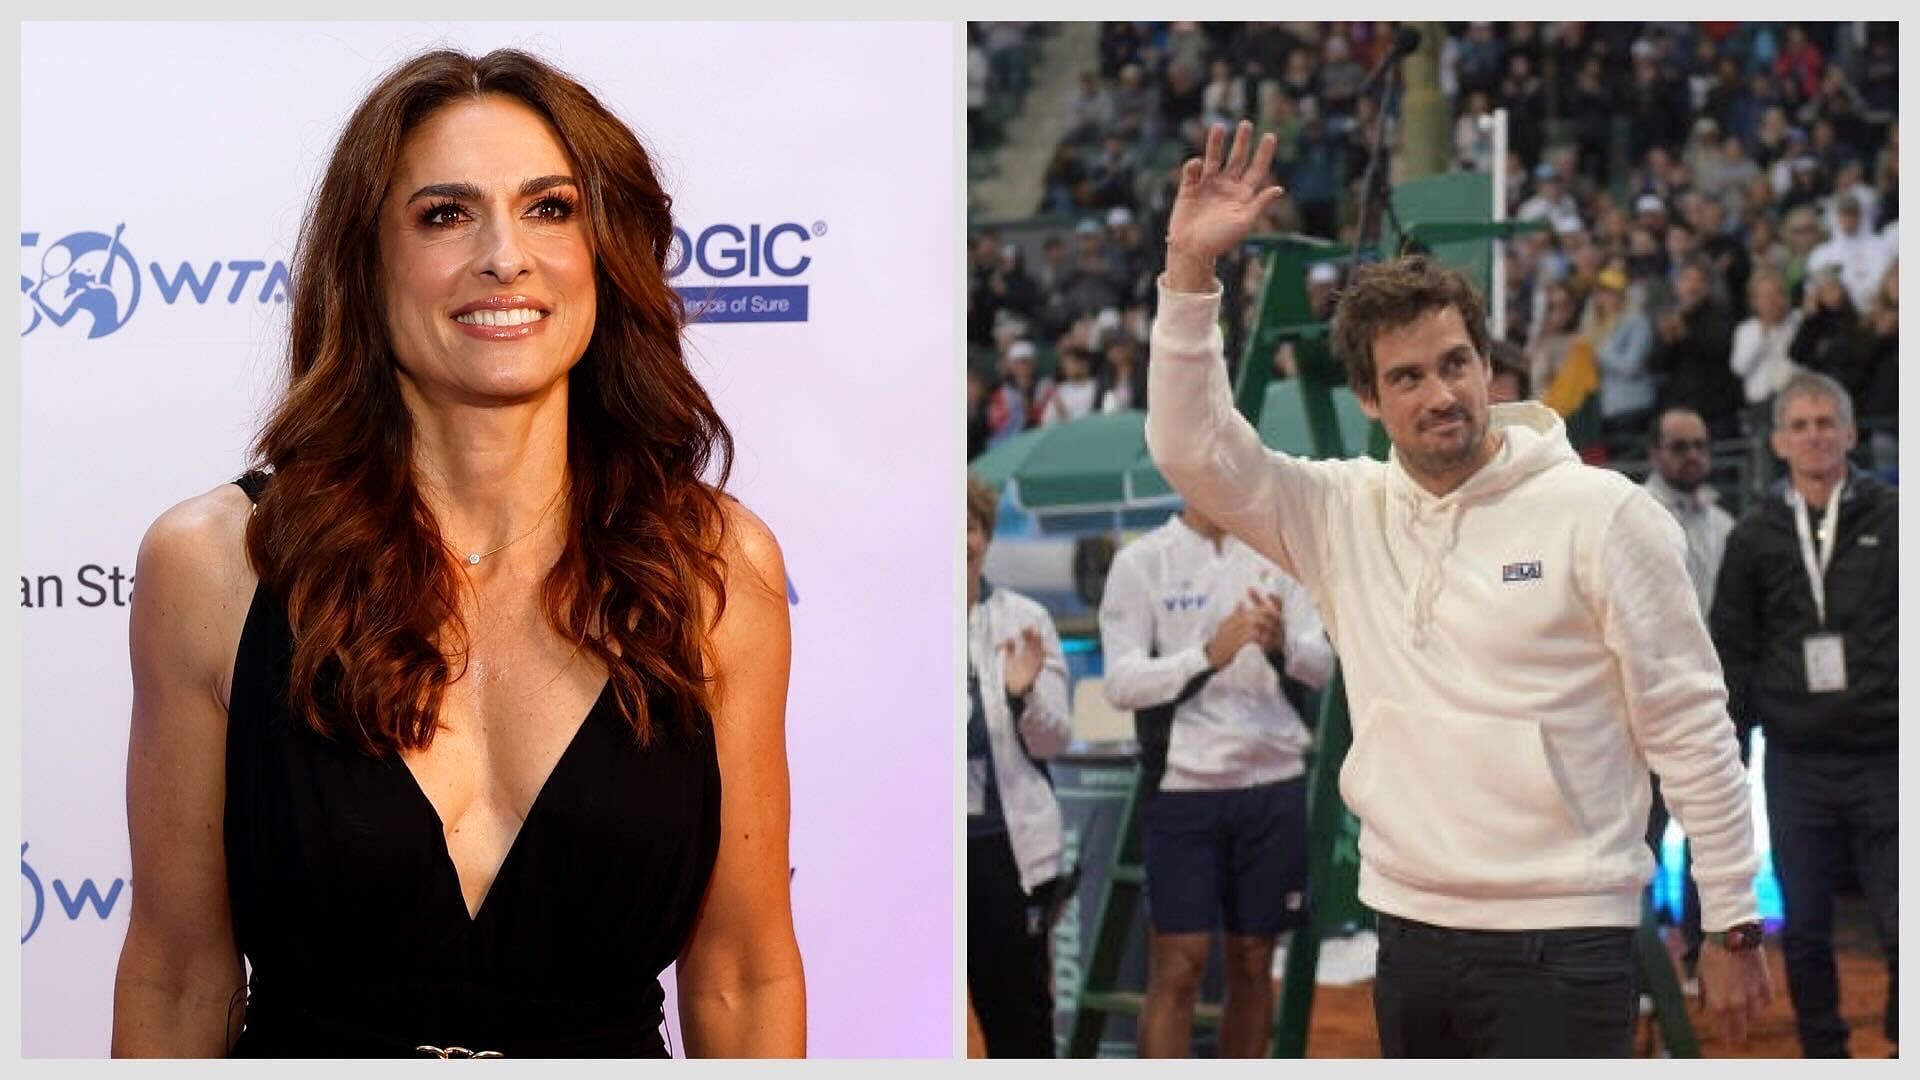 Gabriela Sabatini has wished Guido Pella the best after he announced his tennis retirement.